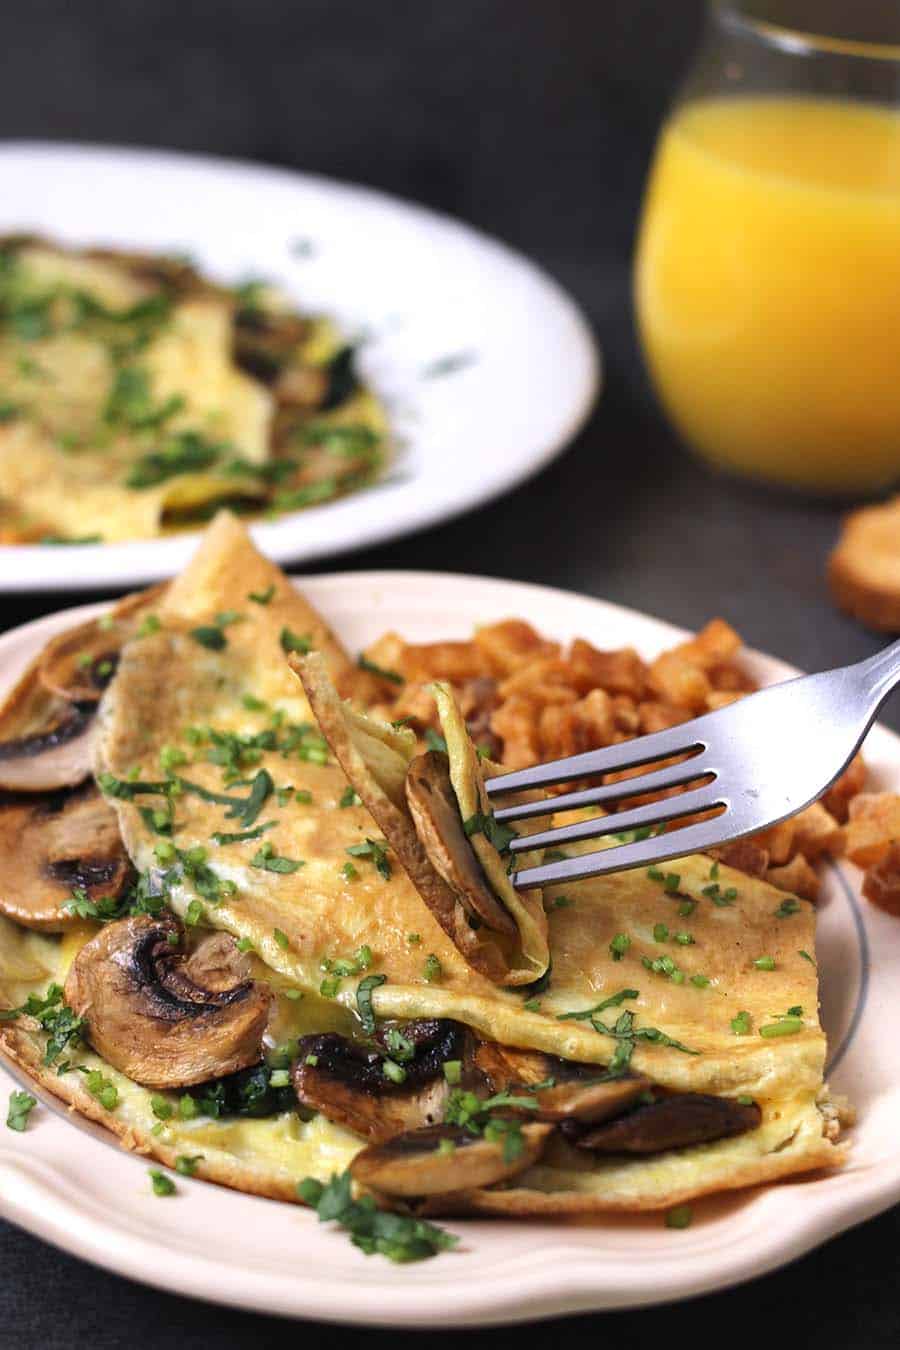 world's best vegetarian omelette recipe, how to make an omelet, fillings ideas #lowcarb #weightloss 